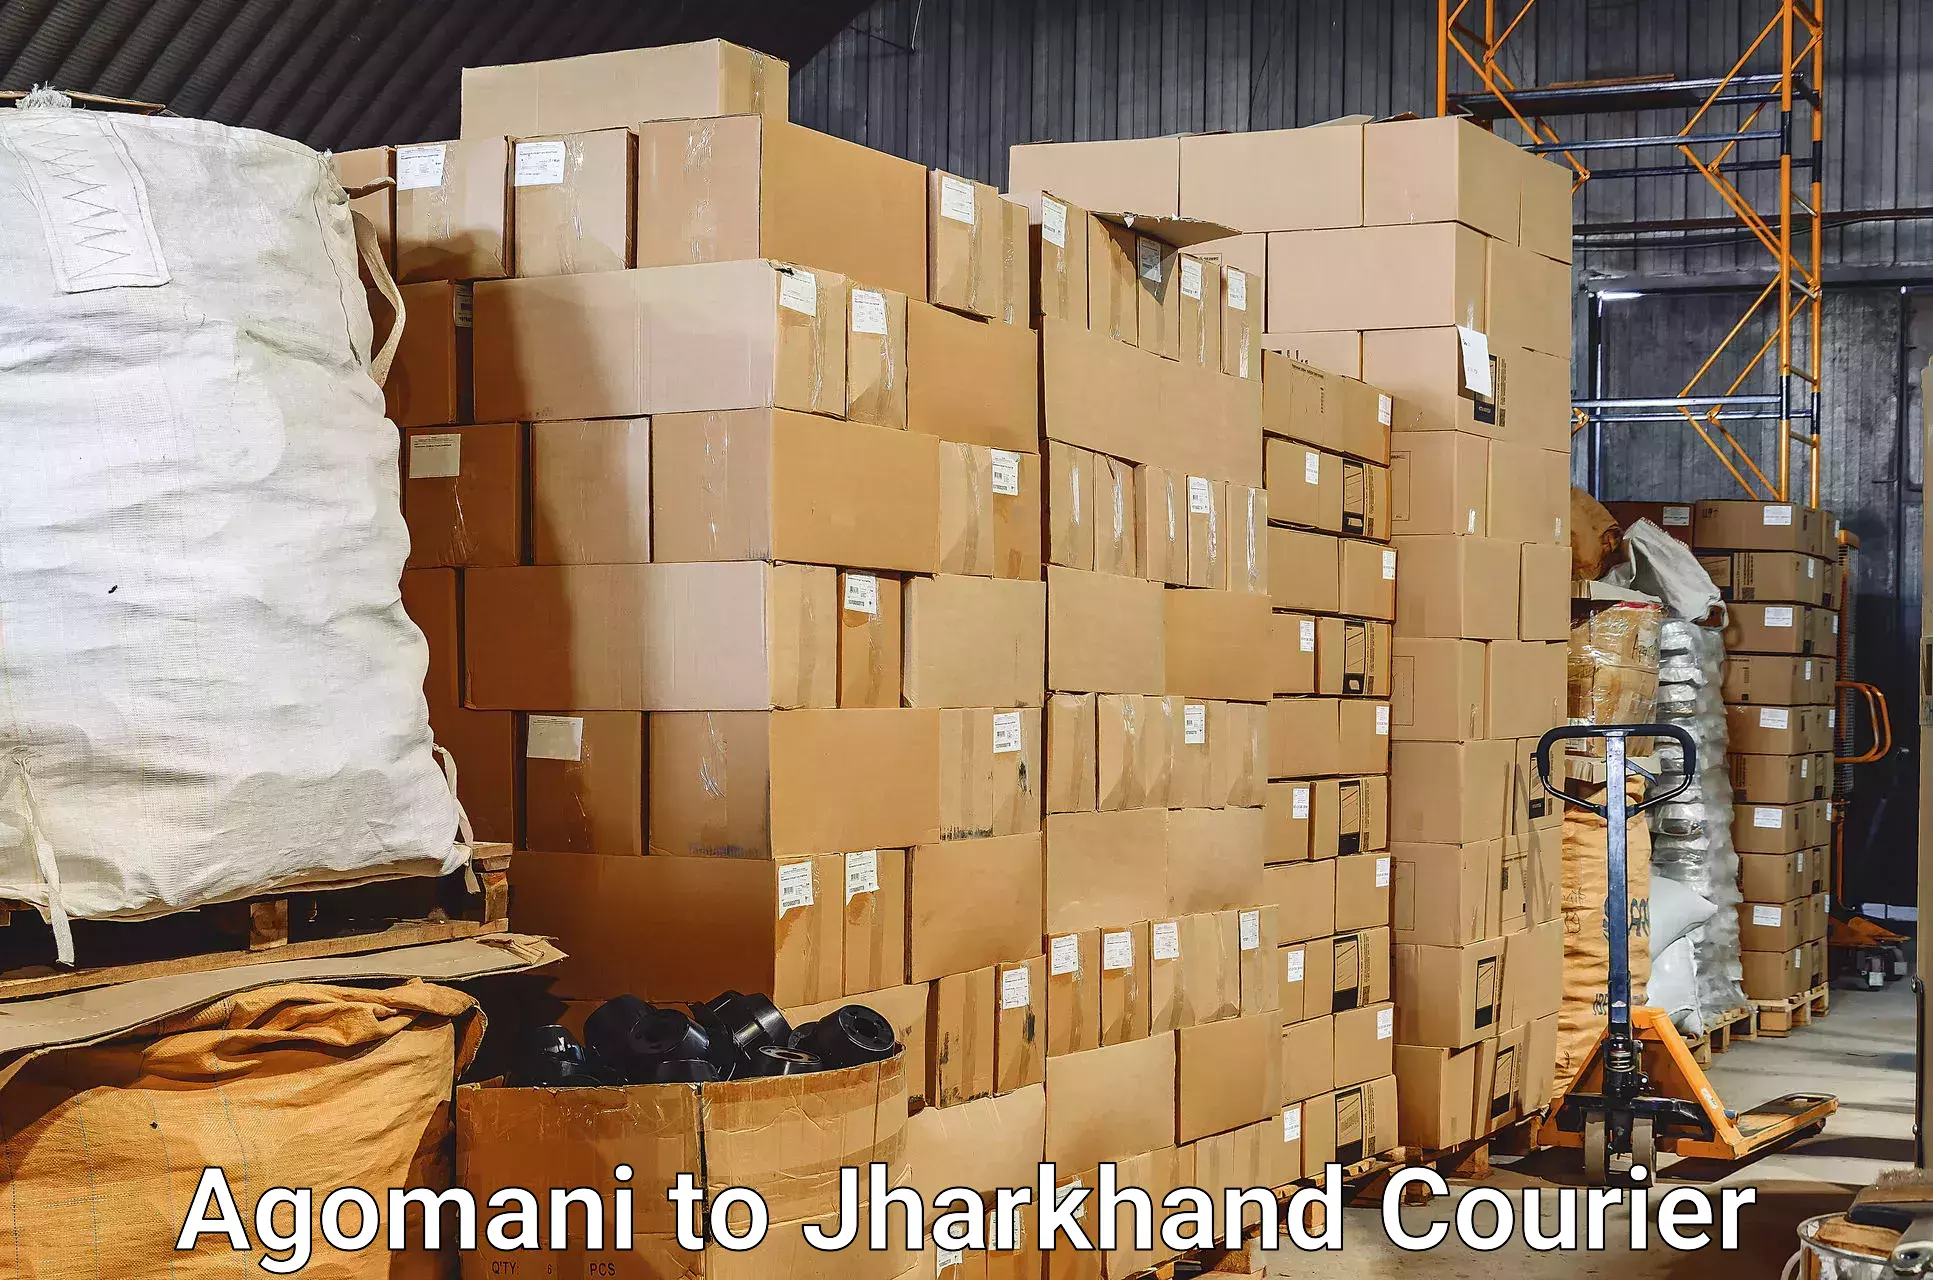 Baggage transport scheduler Agomani to Jharkhand